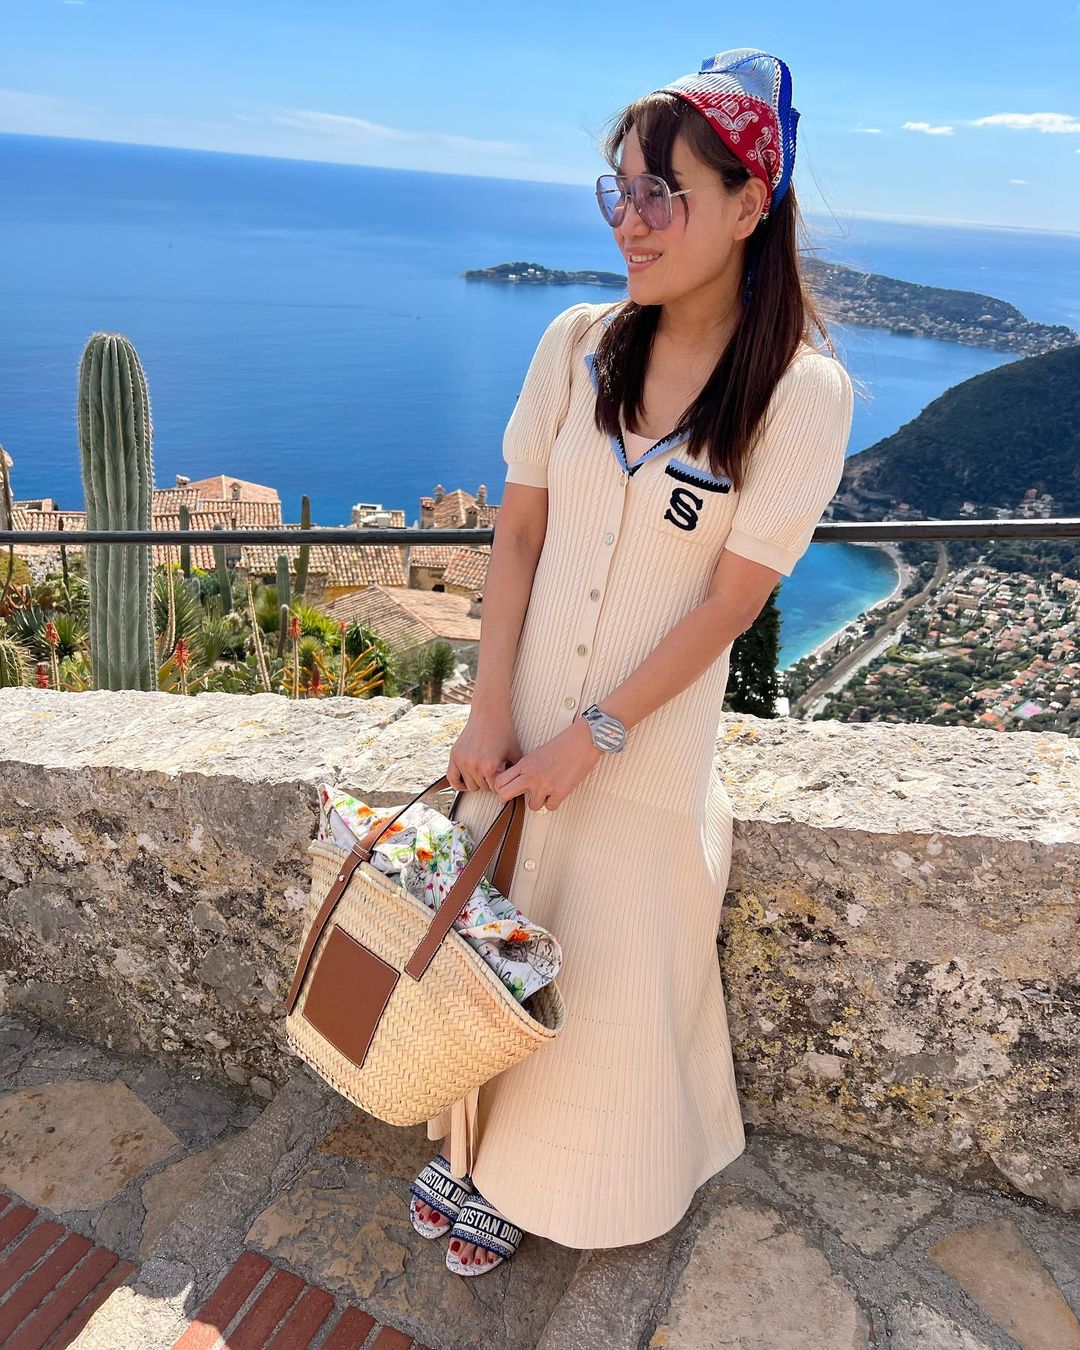 Celebrities And Their Stylish Travel Outfits In Europe